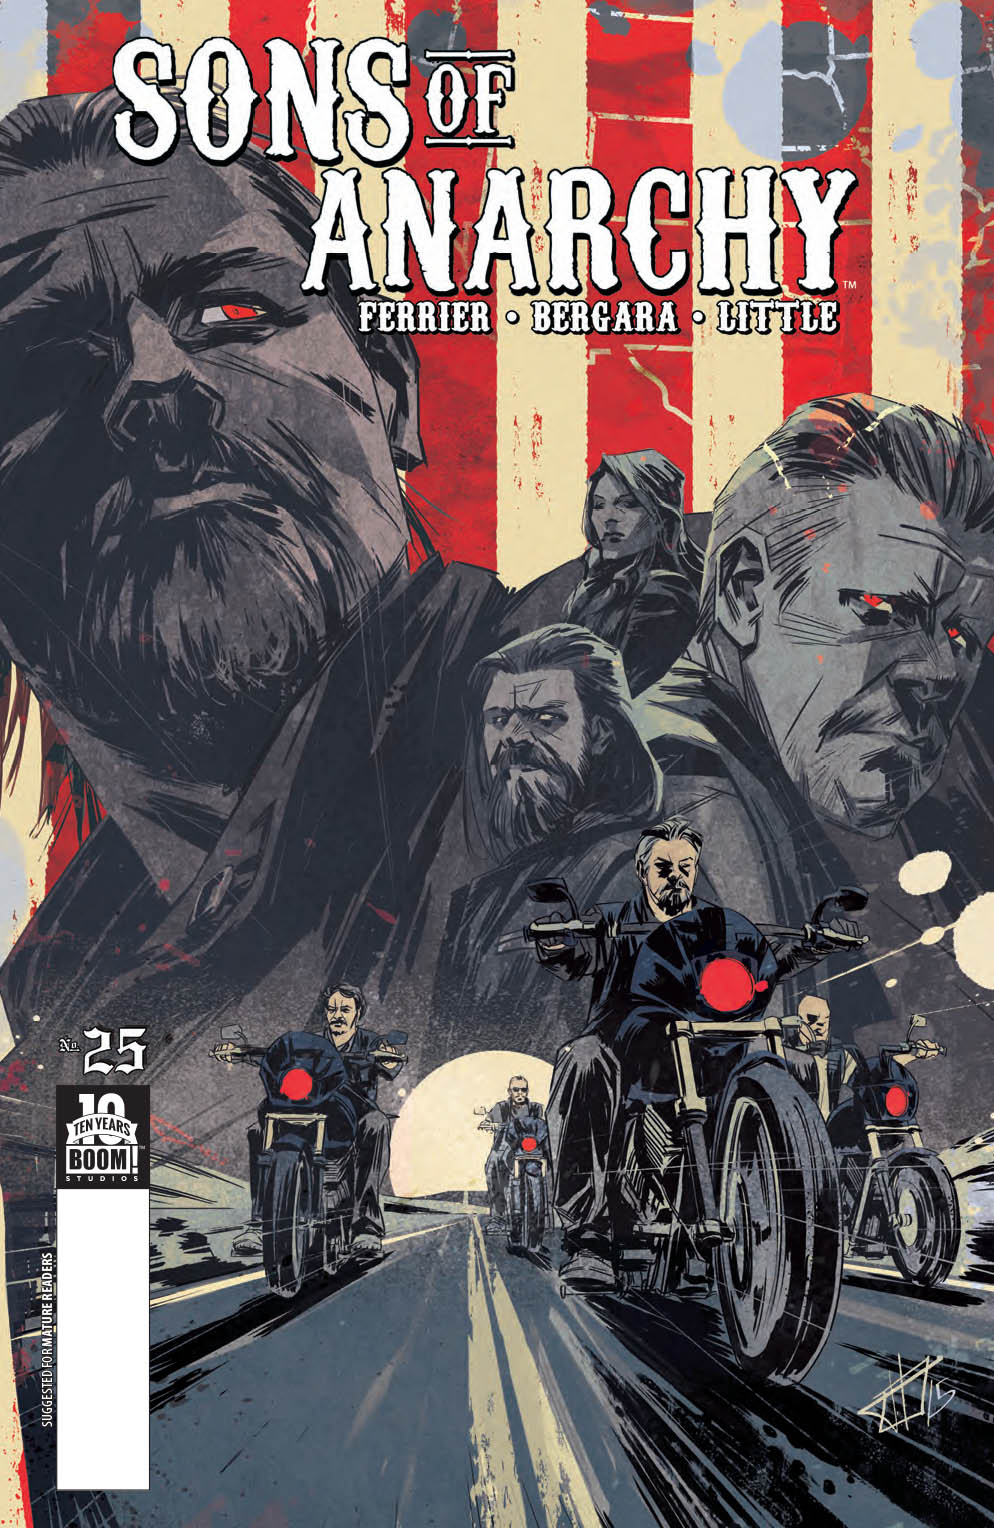 SONS OF ANARCHY #25 (MR)